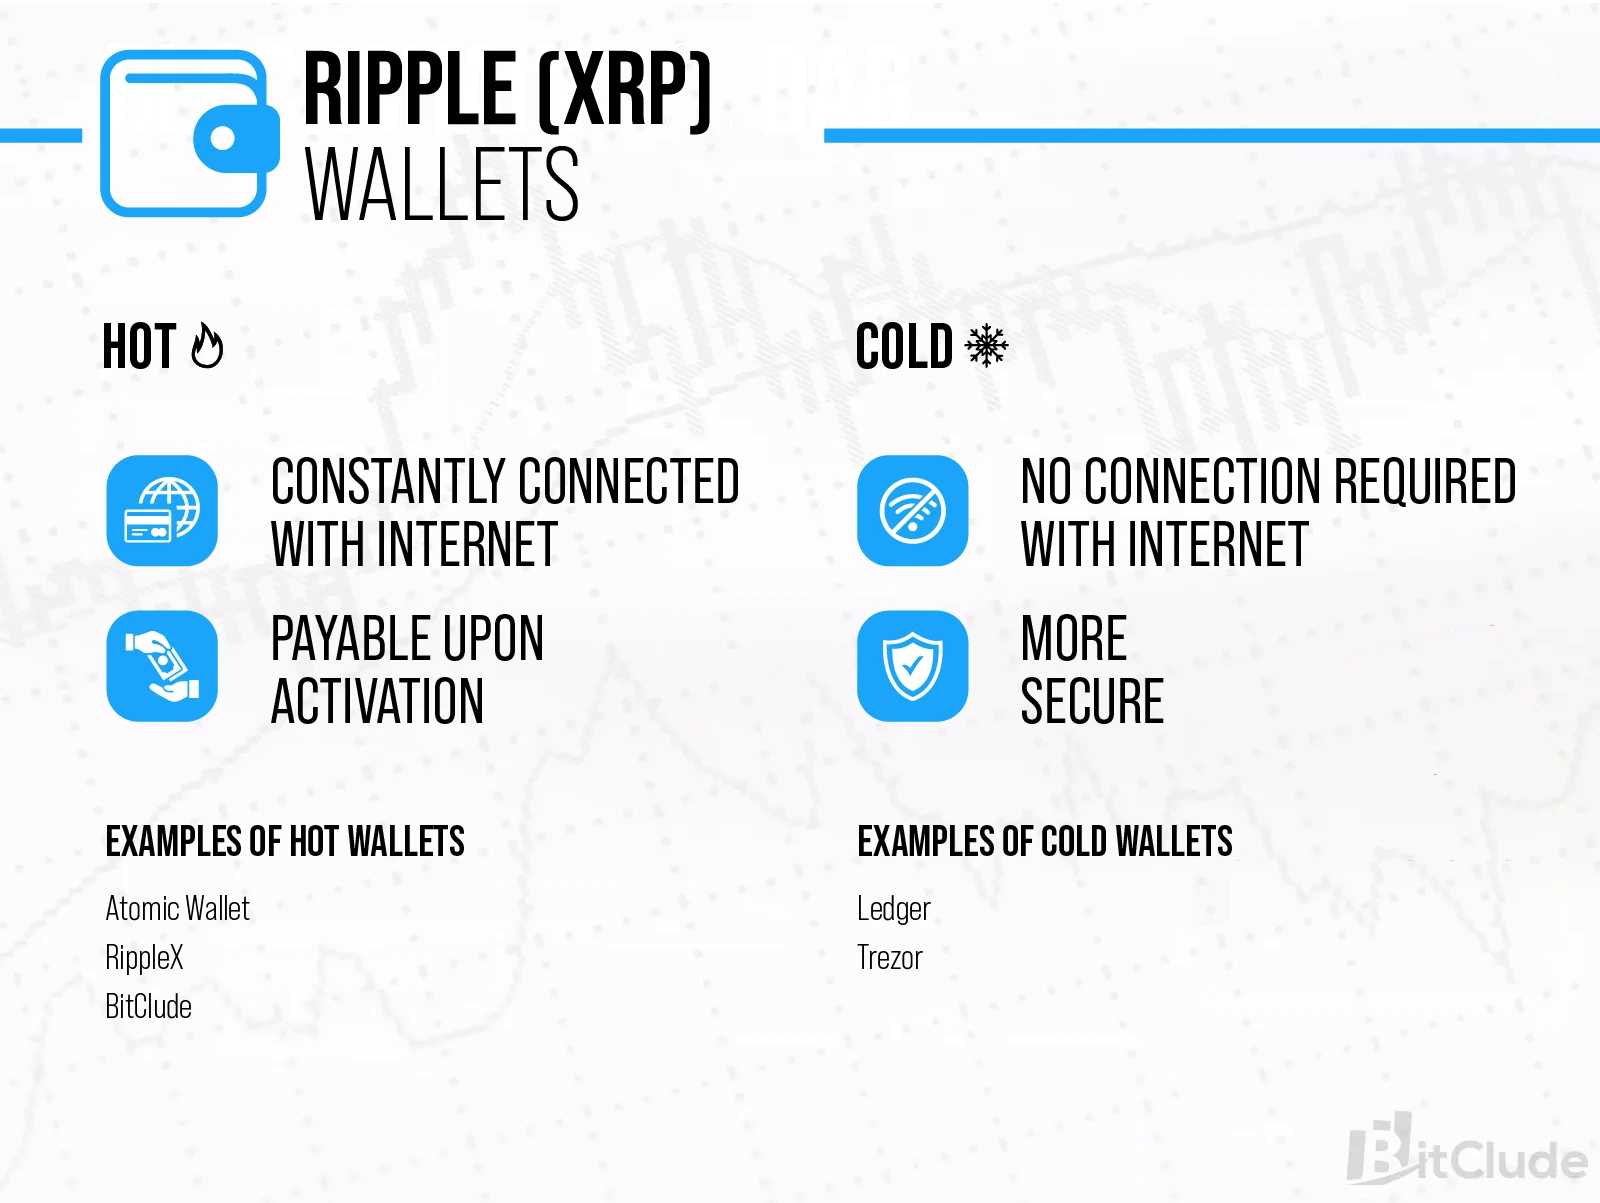 XRP can be stored on warm and cold wallets. One of the more interesting hot wallets is BitClude.